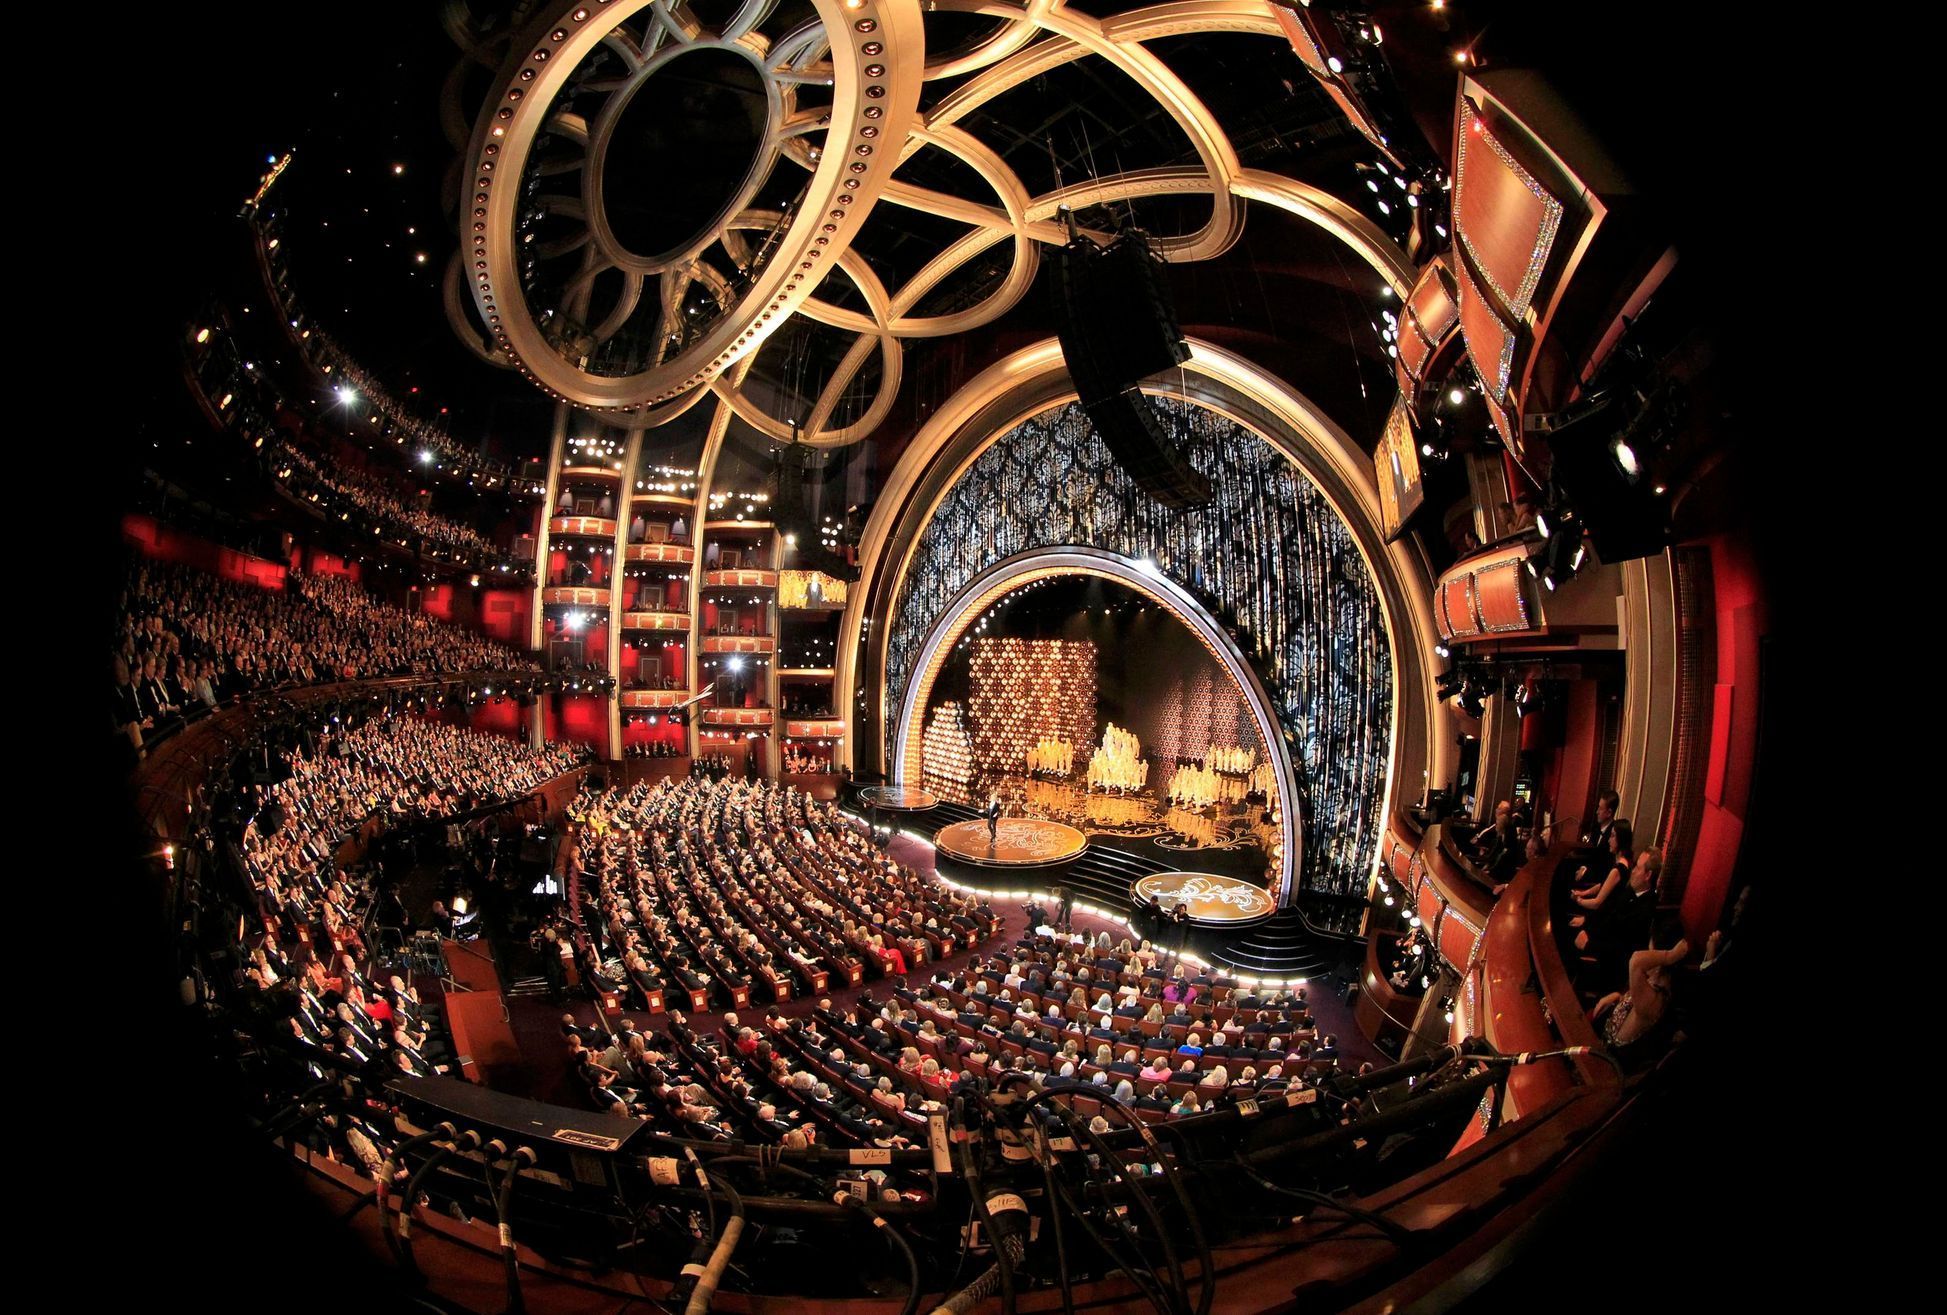 Ellen Degeneres hosts the show at the start of the 86th Academy Awards in Hollywood